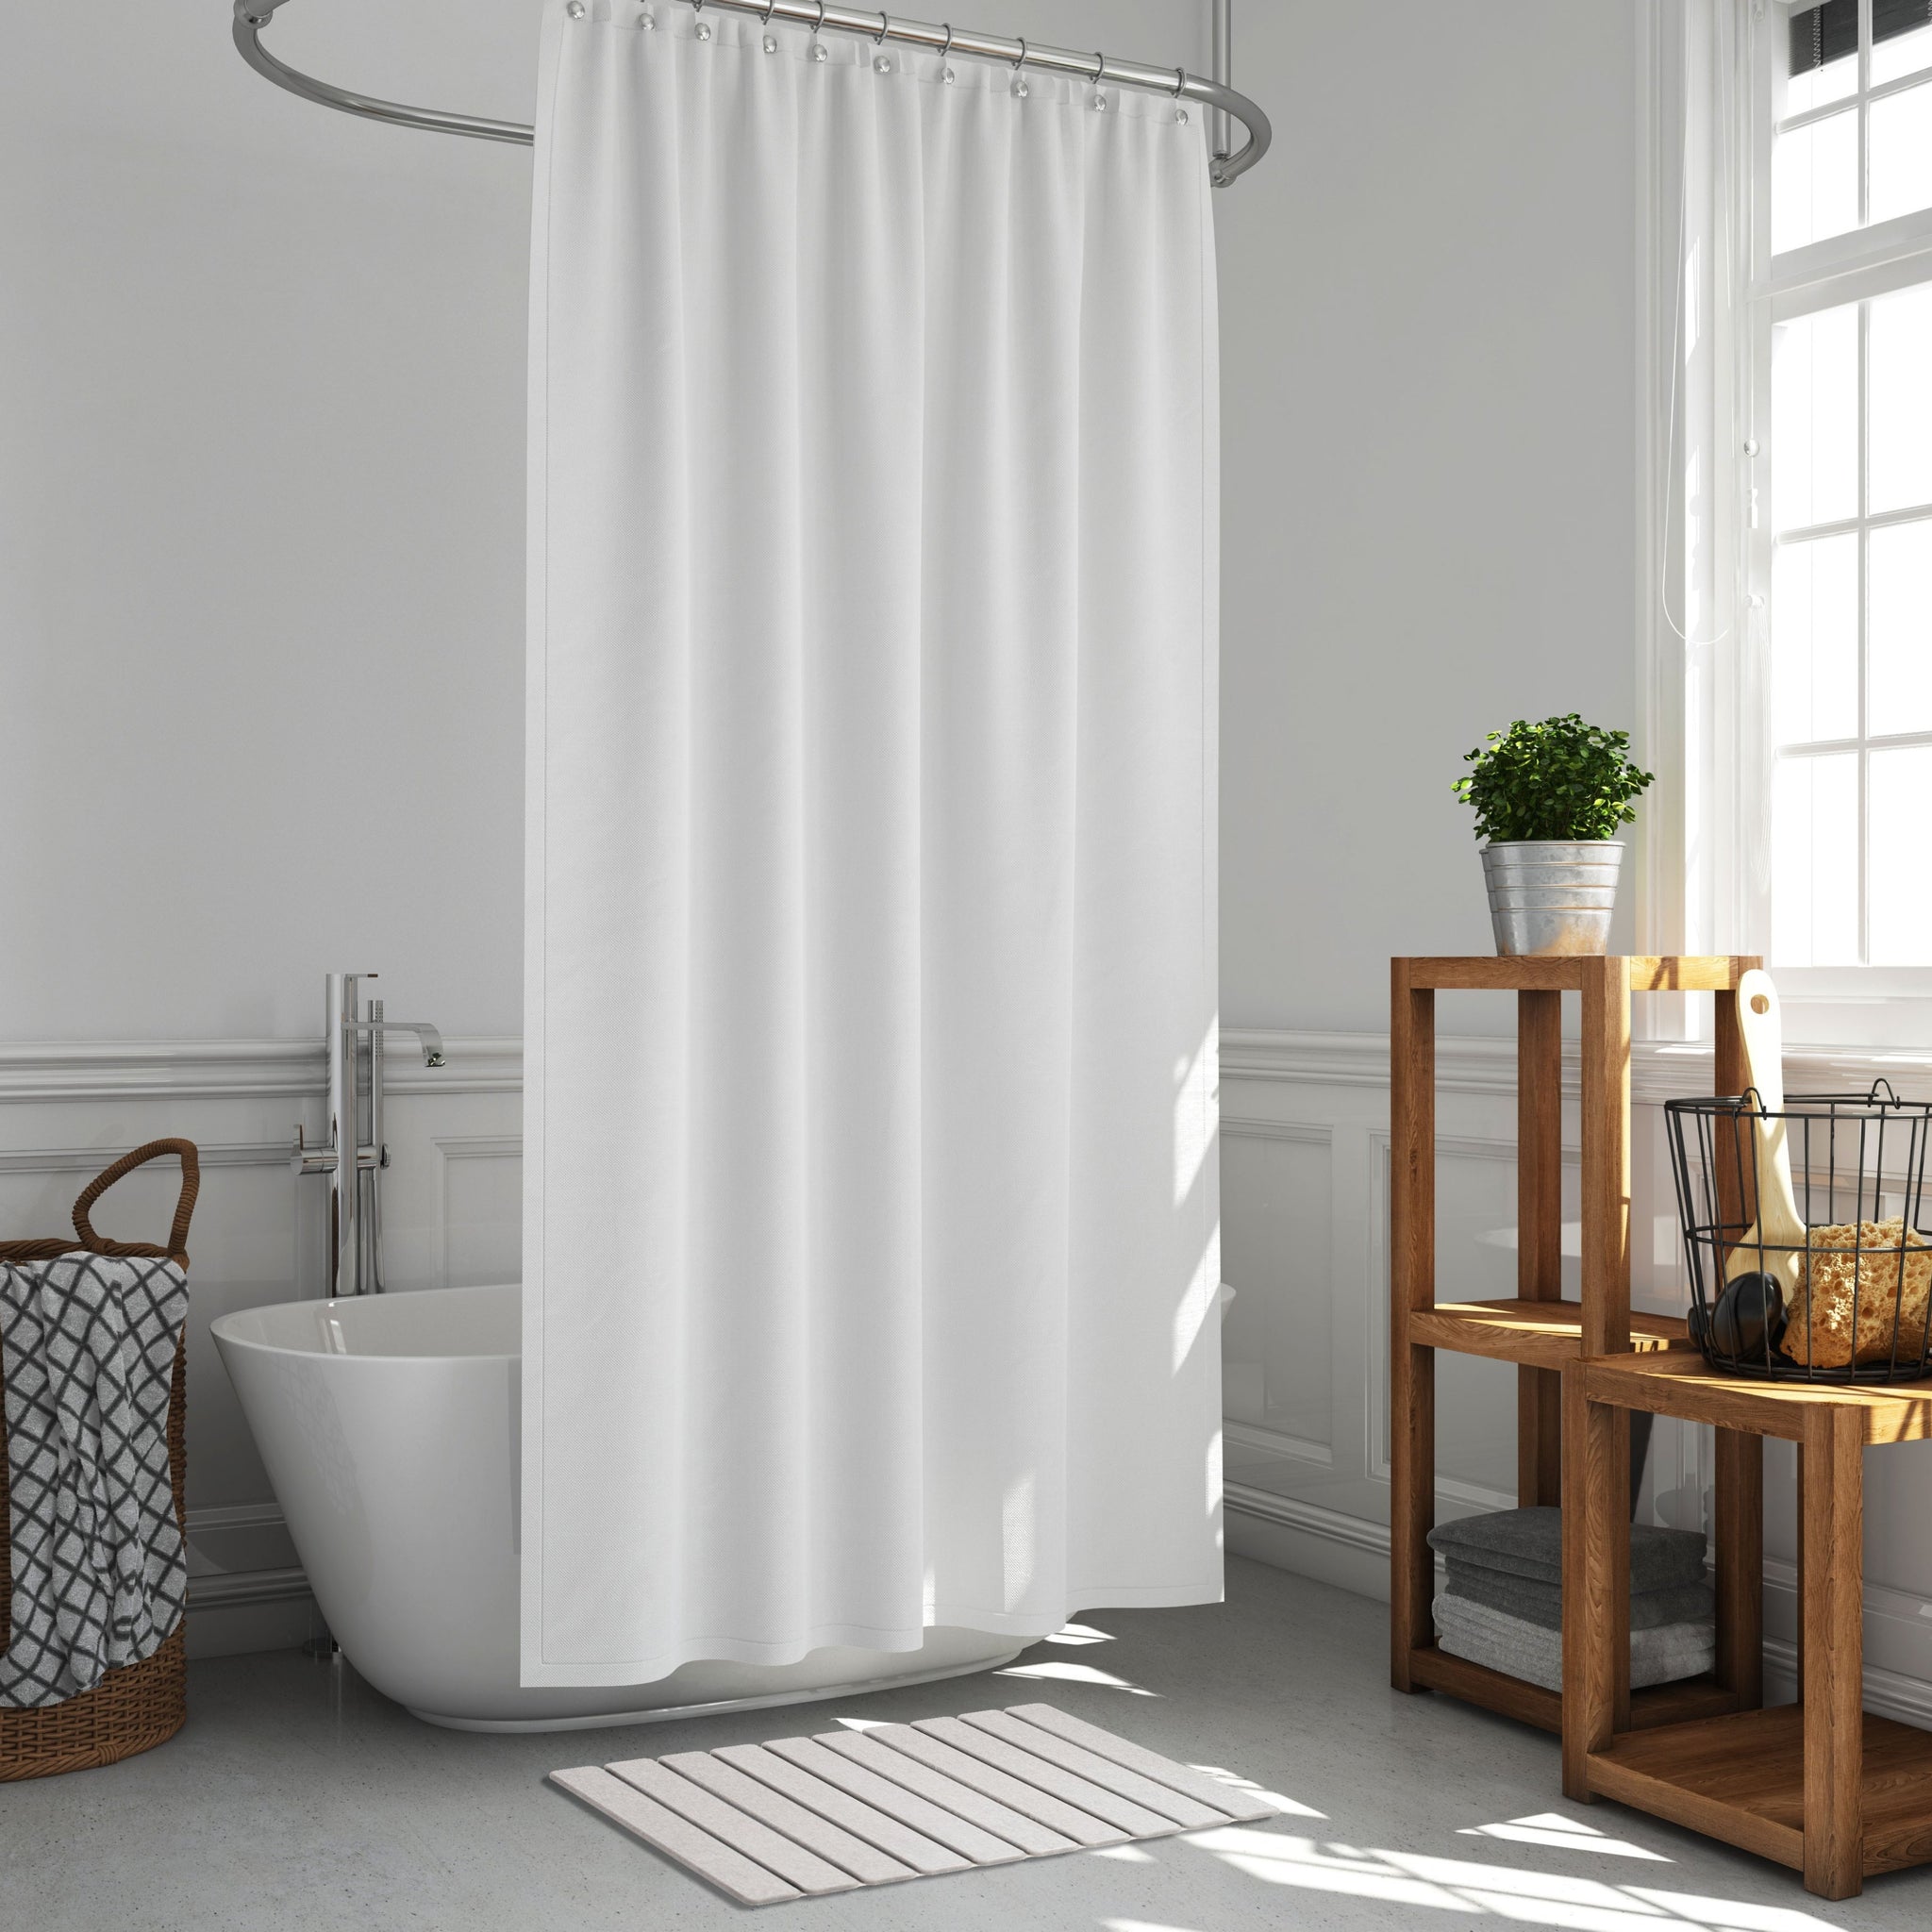 10 Must-Have Bathroom Accessories for a Stylish and Functional Space